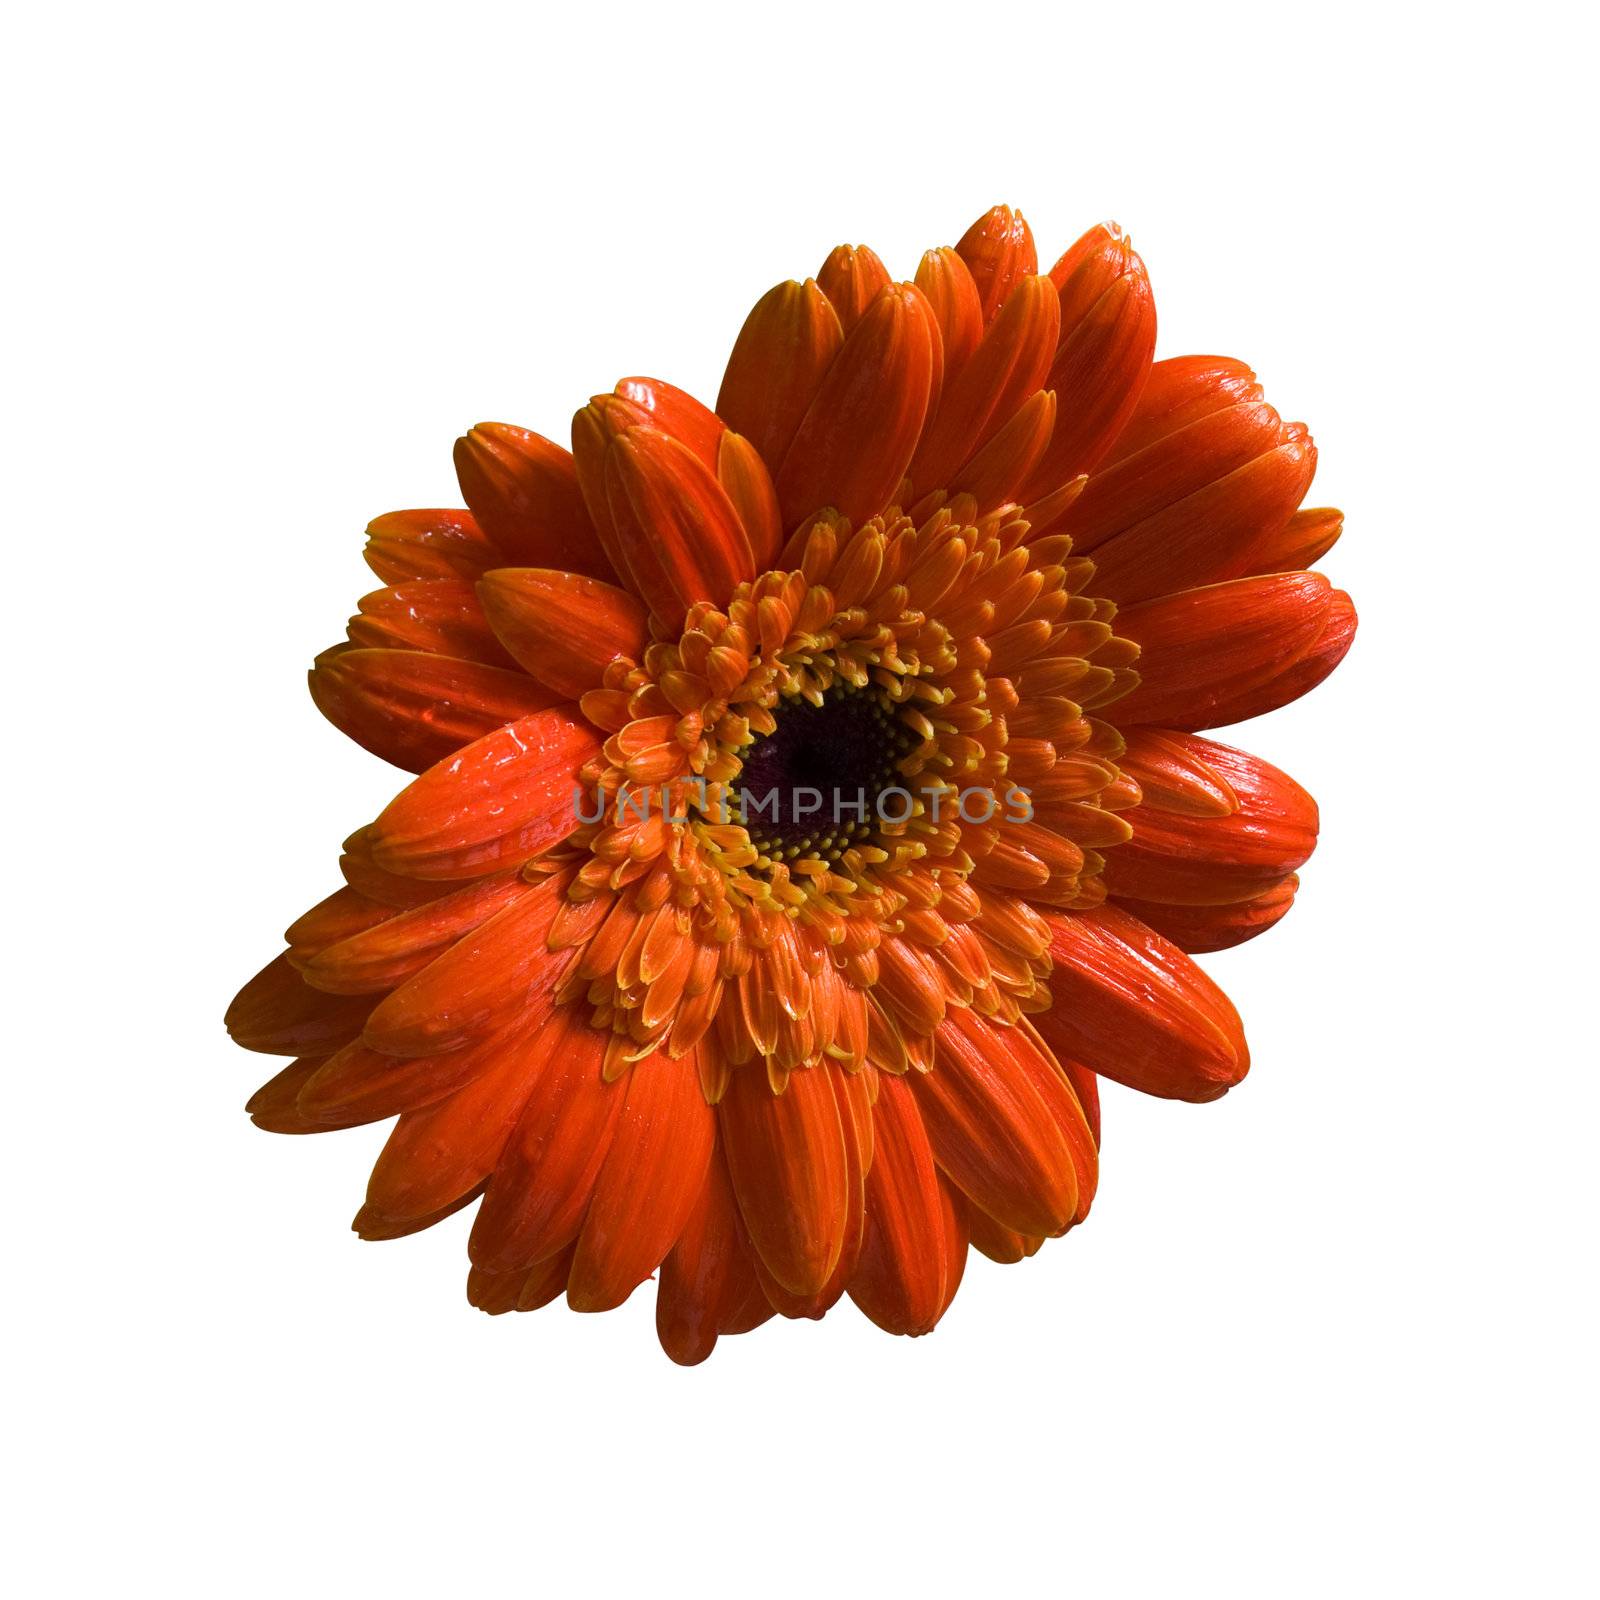 Wet orange flower isolated with clippingpath. by cienpies